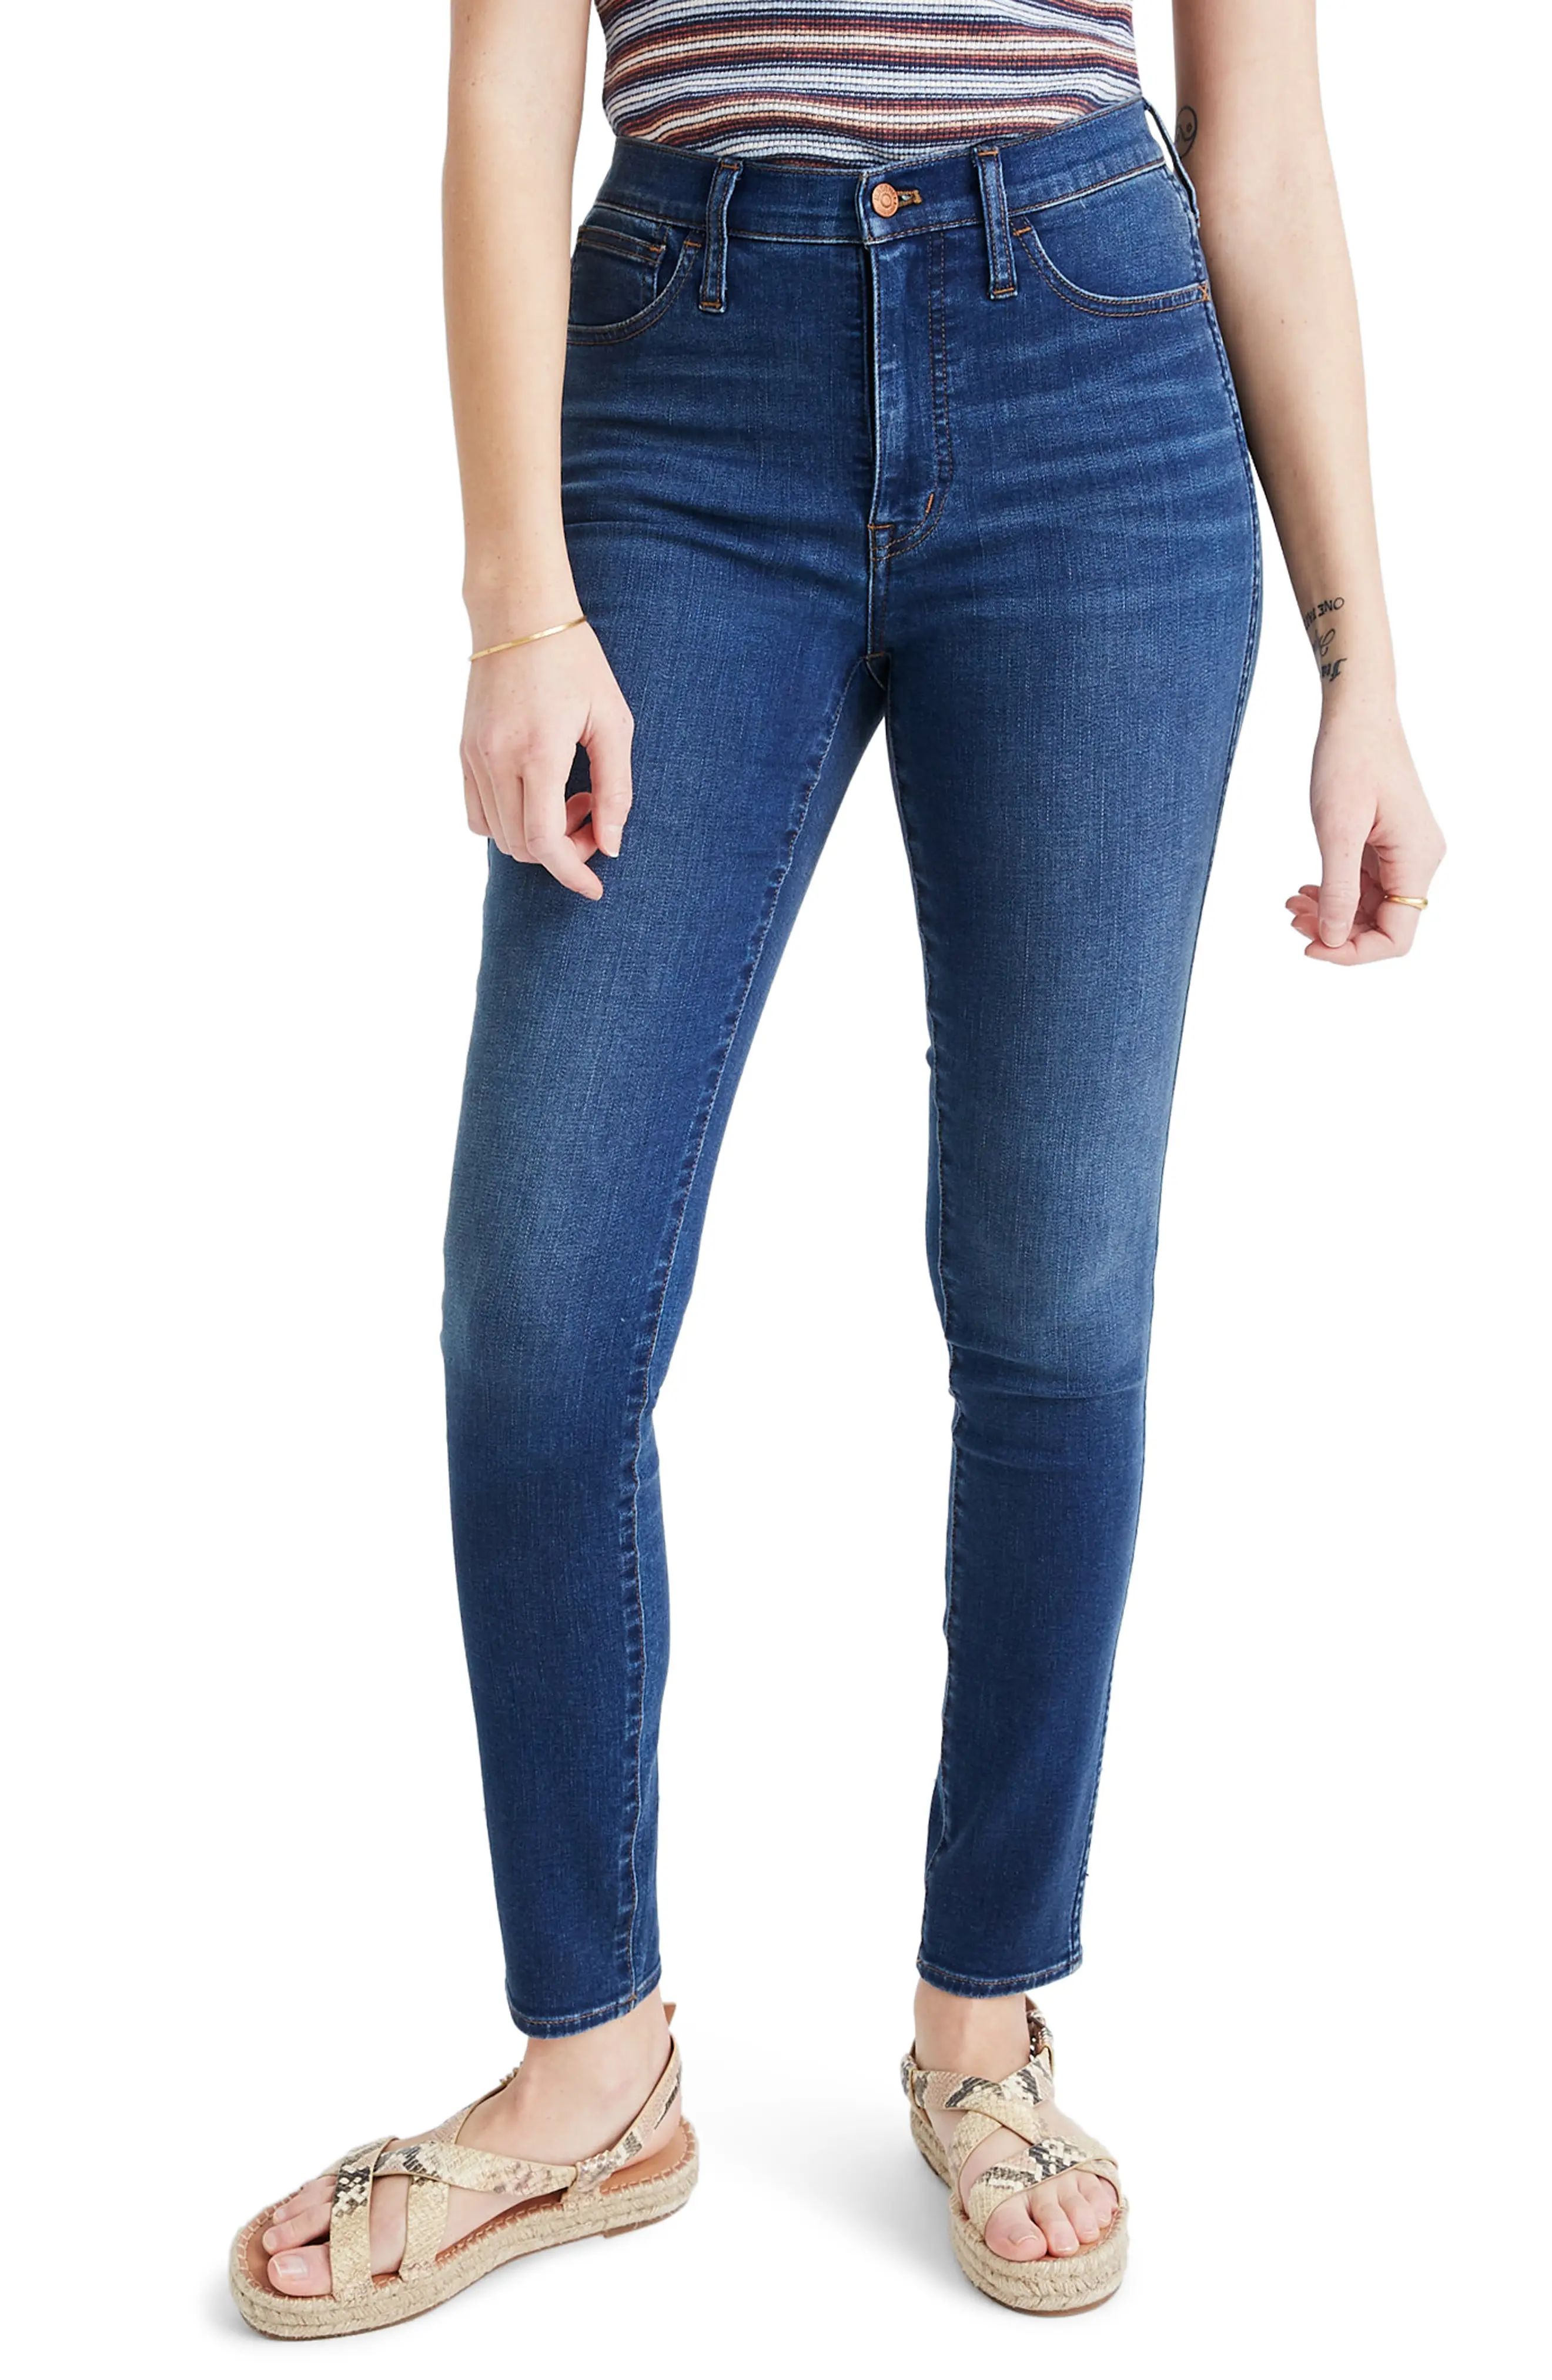 Madewell 10-Inch Roadtripper Jeans in Playford Wash at Nordstrom, Size 26 | Nordstrom